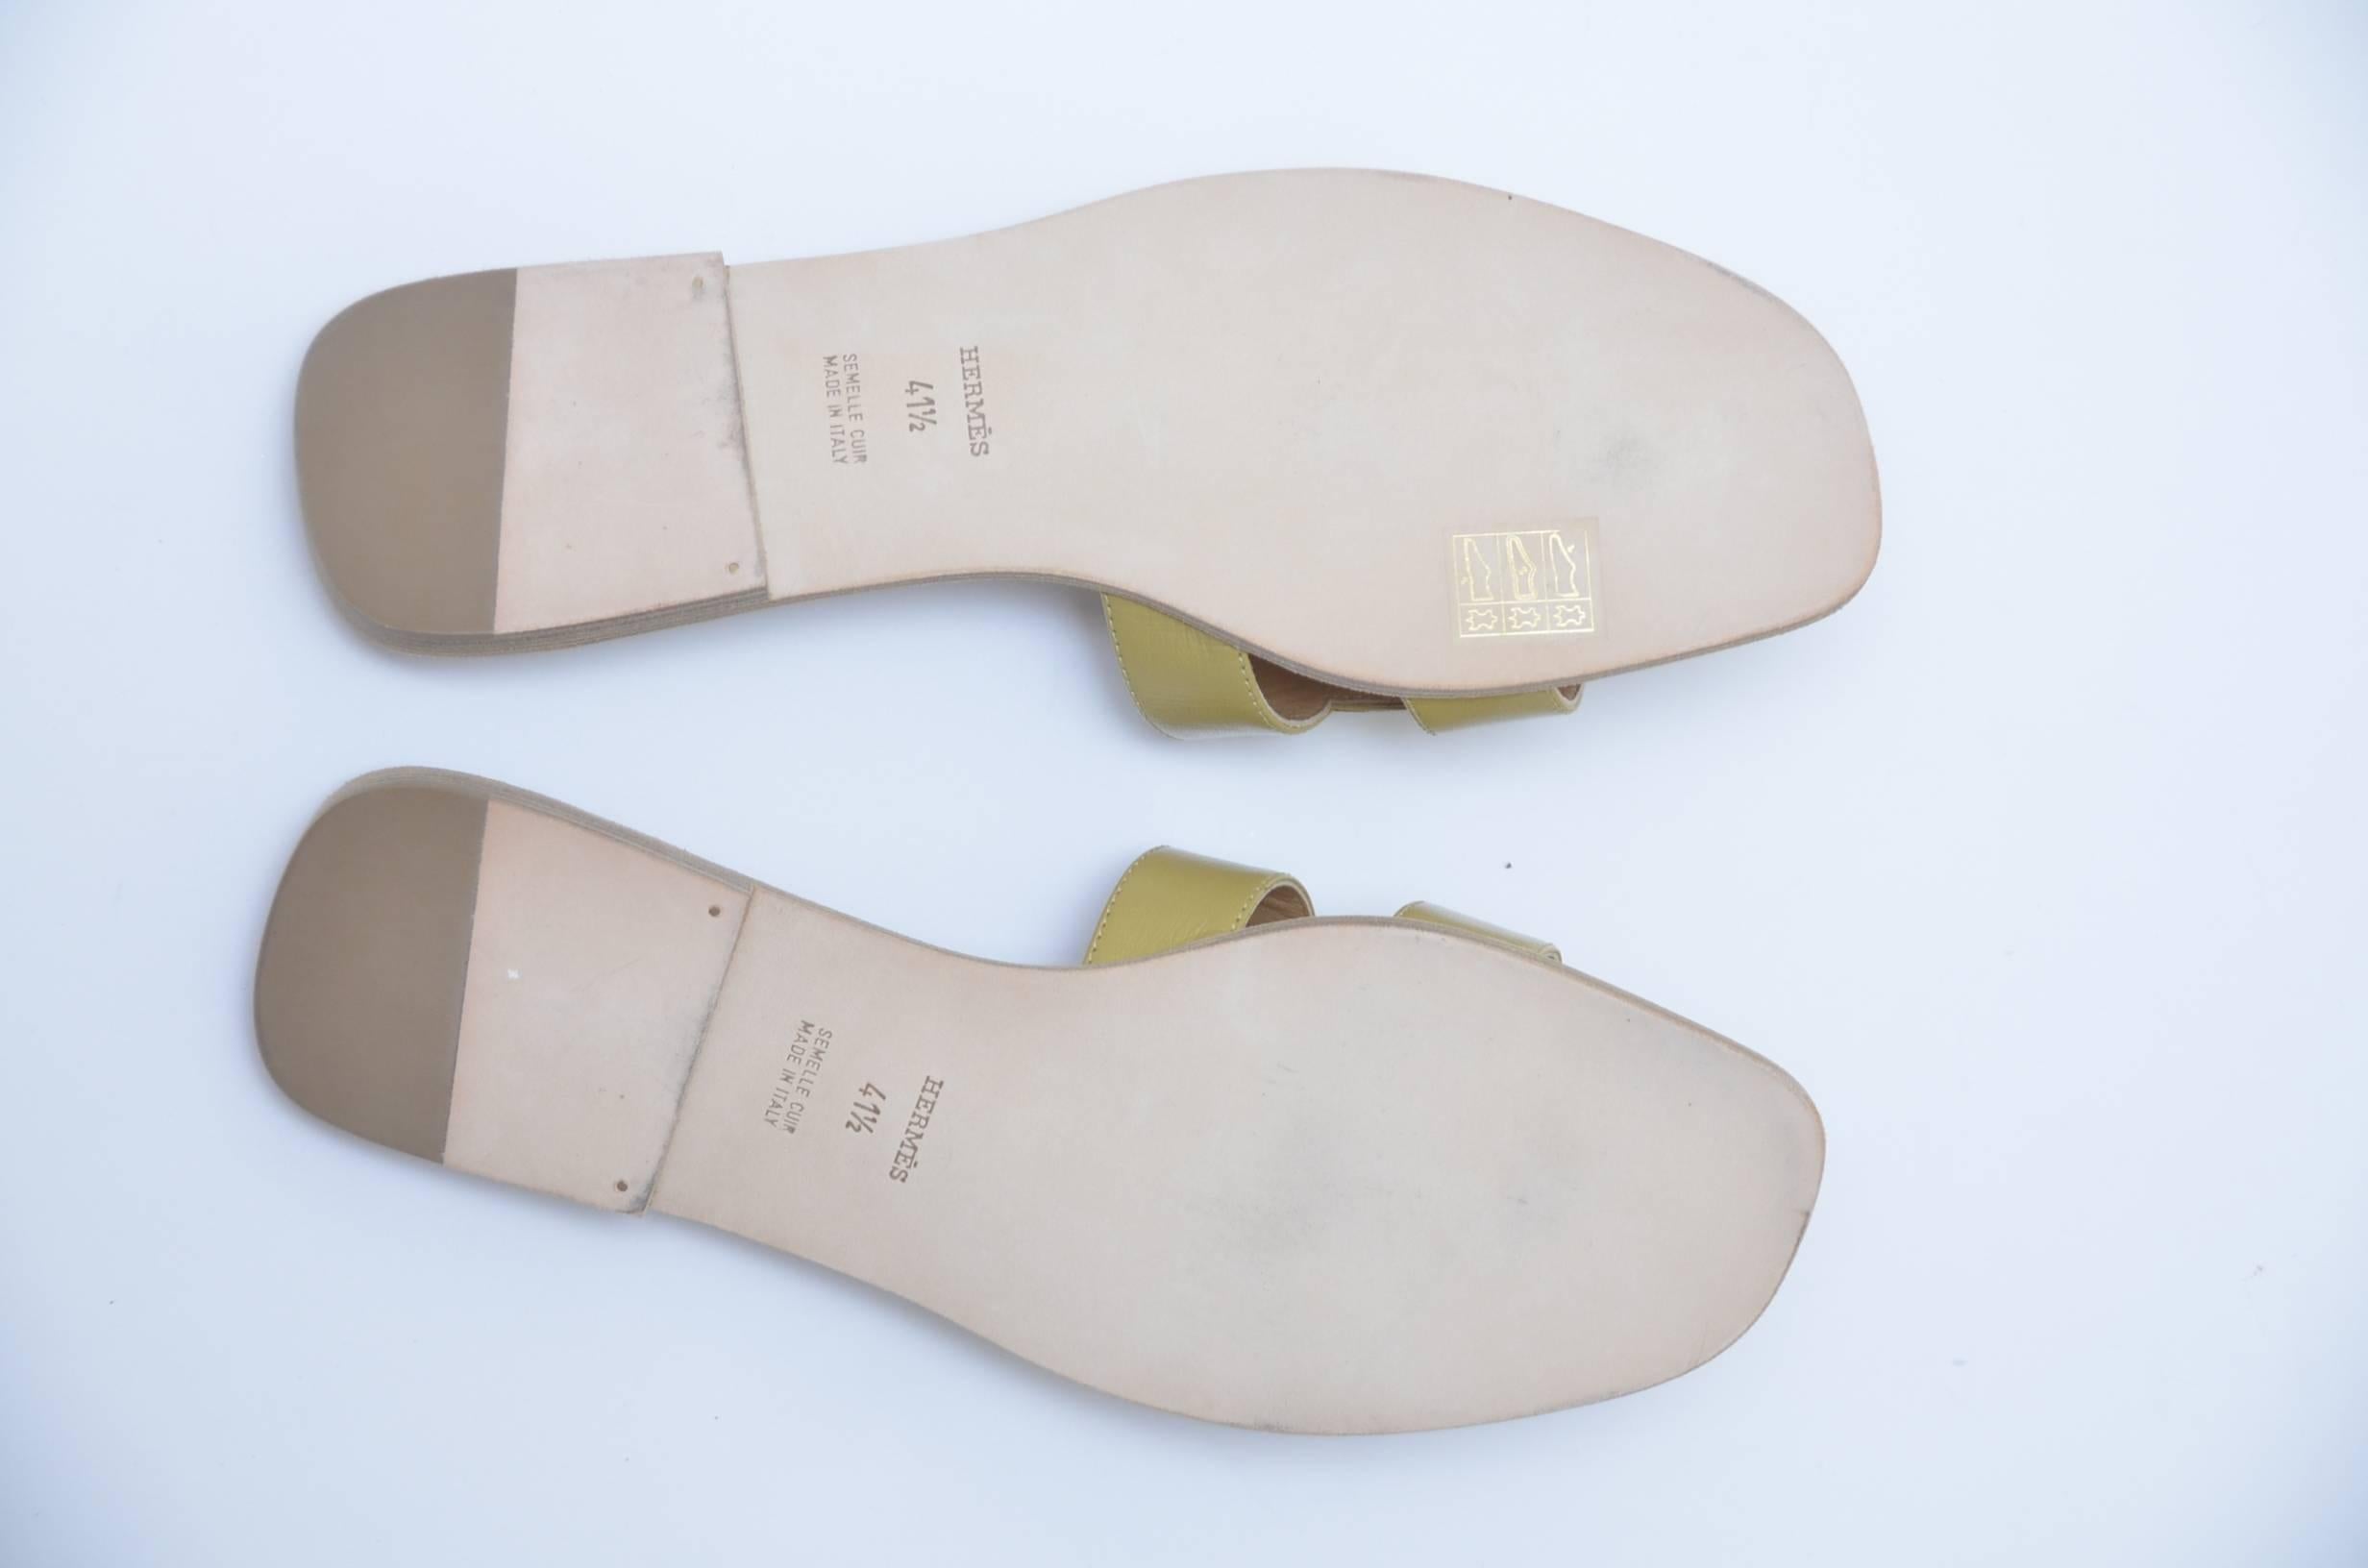 Hermes H olive sandals.
Size 41.5.Color:Gingembre .
New with box.
Made in Italy.

FINAL SALE.